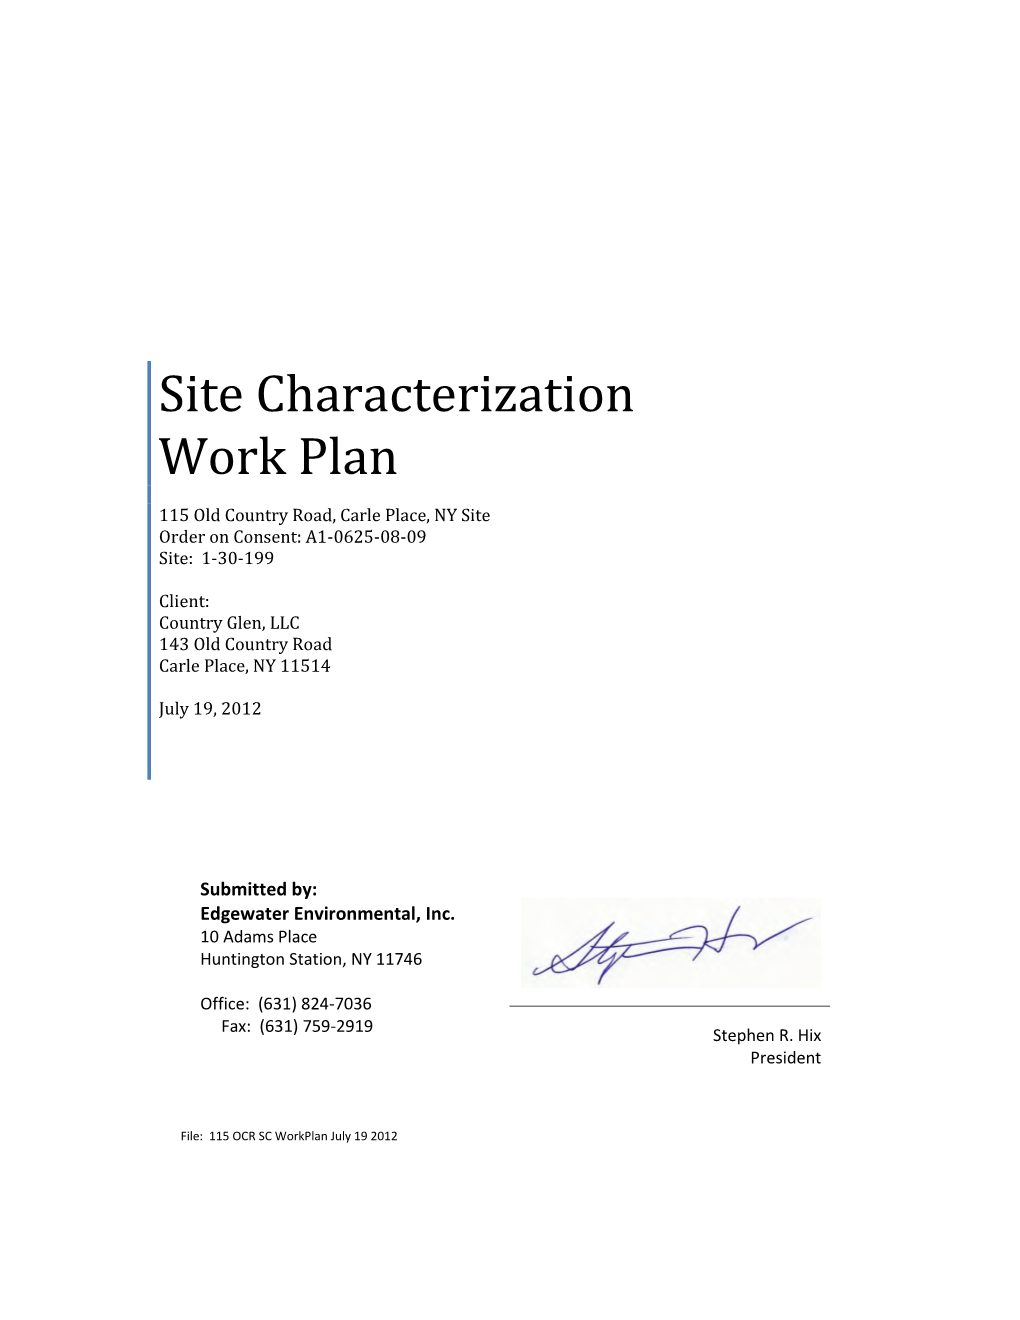 Site Characterization Work Plan 115 Old Country Road, Carle Place, NY Site Order on Consent: A1-0625-08-09 Site: 1-30-199